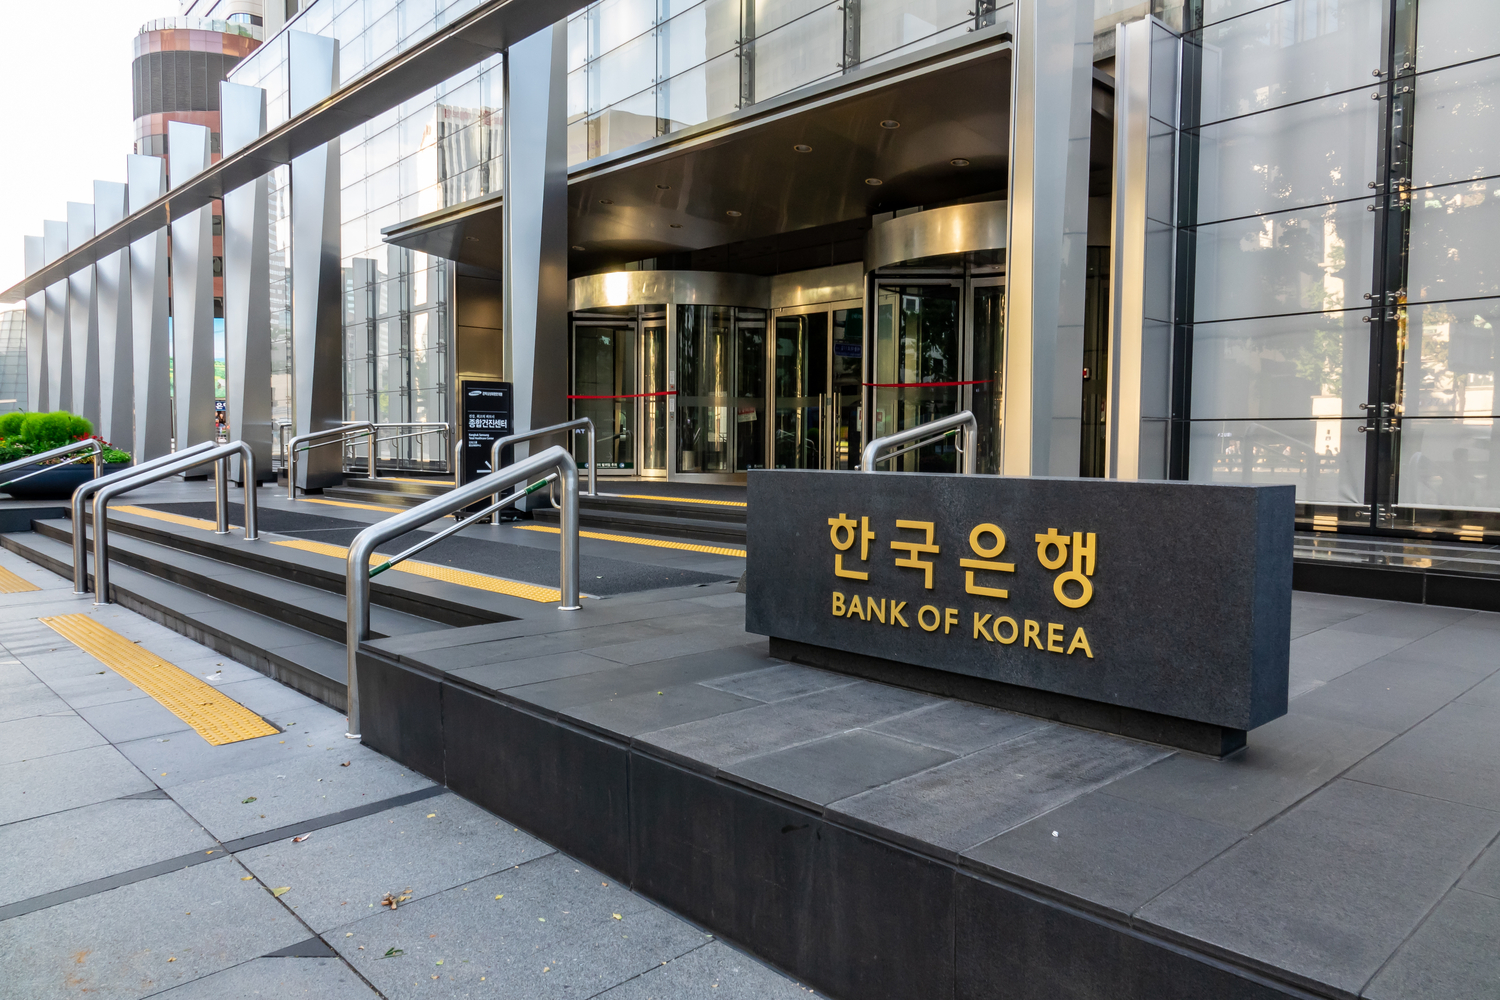 Bank of Korea: CBDCs Are Fiat Currency Not Virtual Assets - CoinDesk